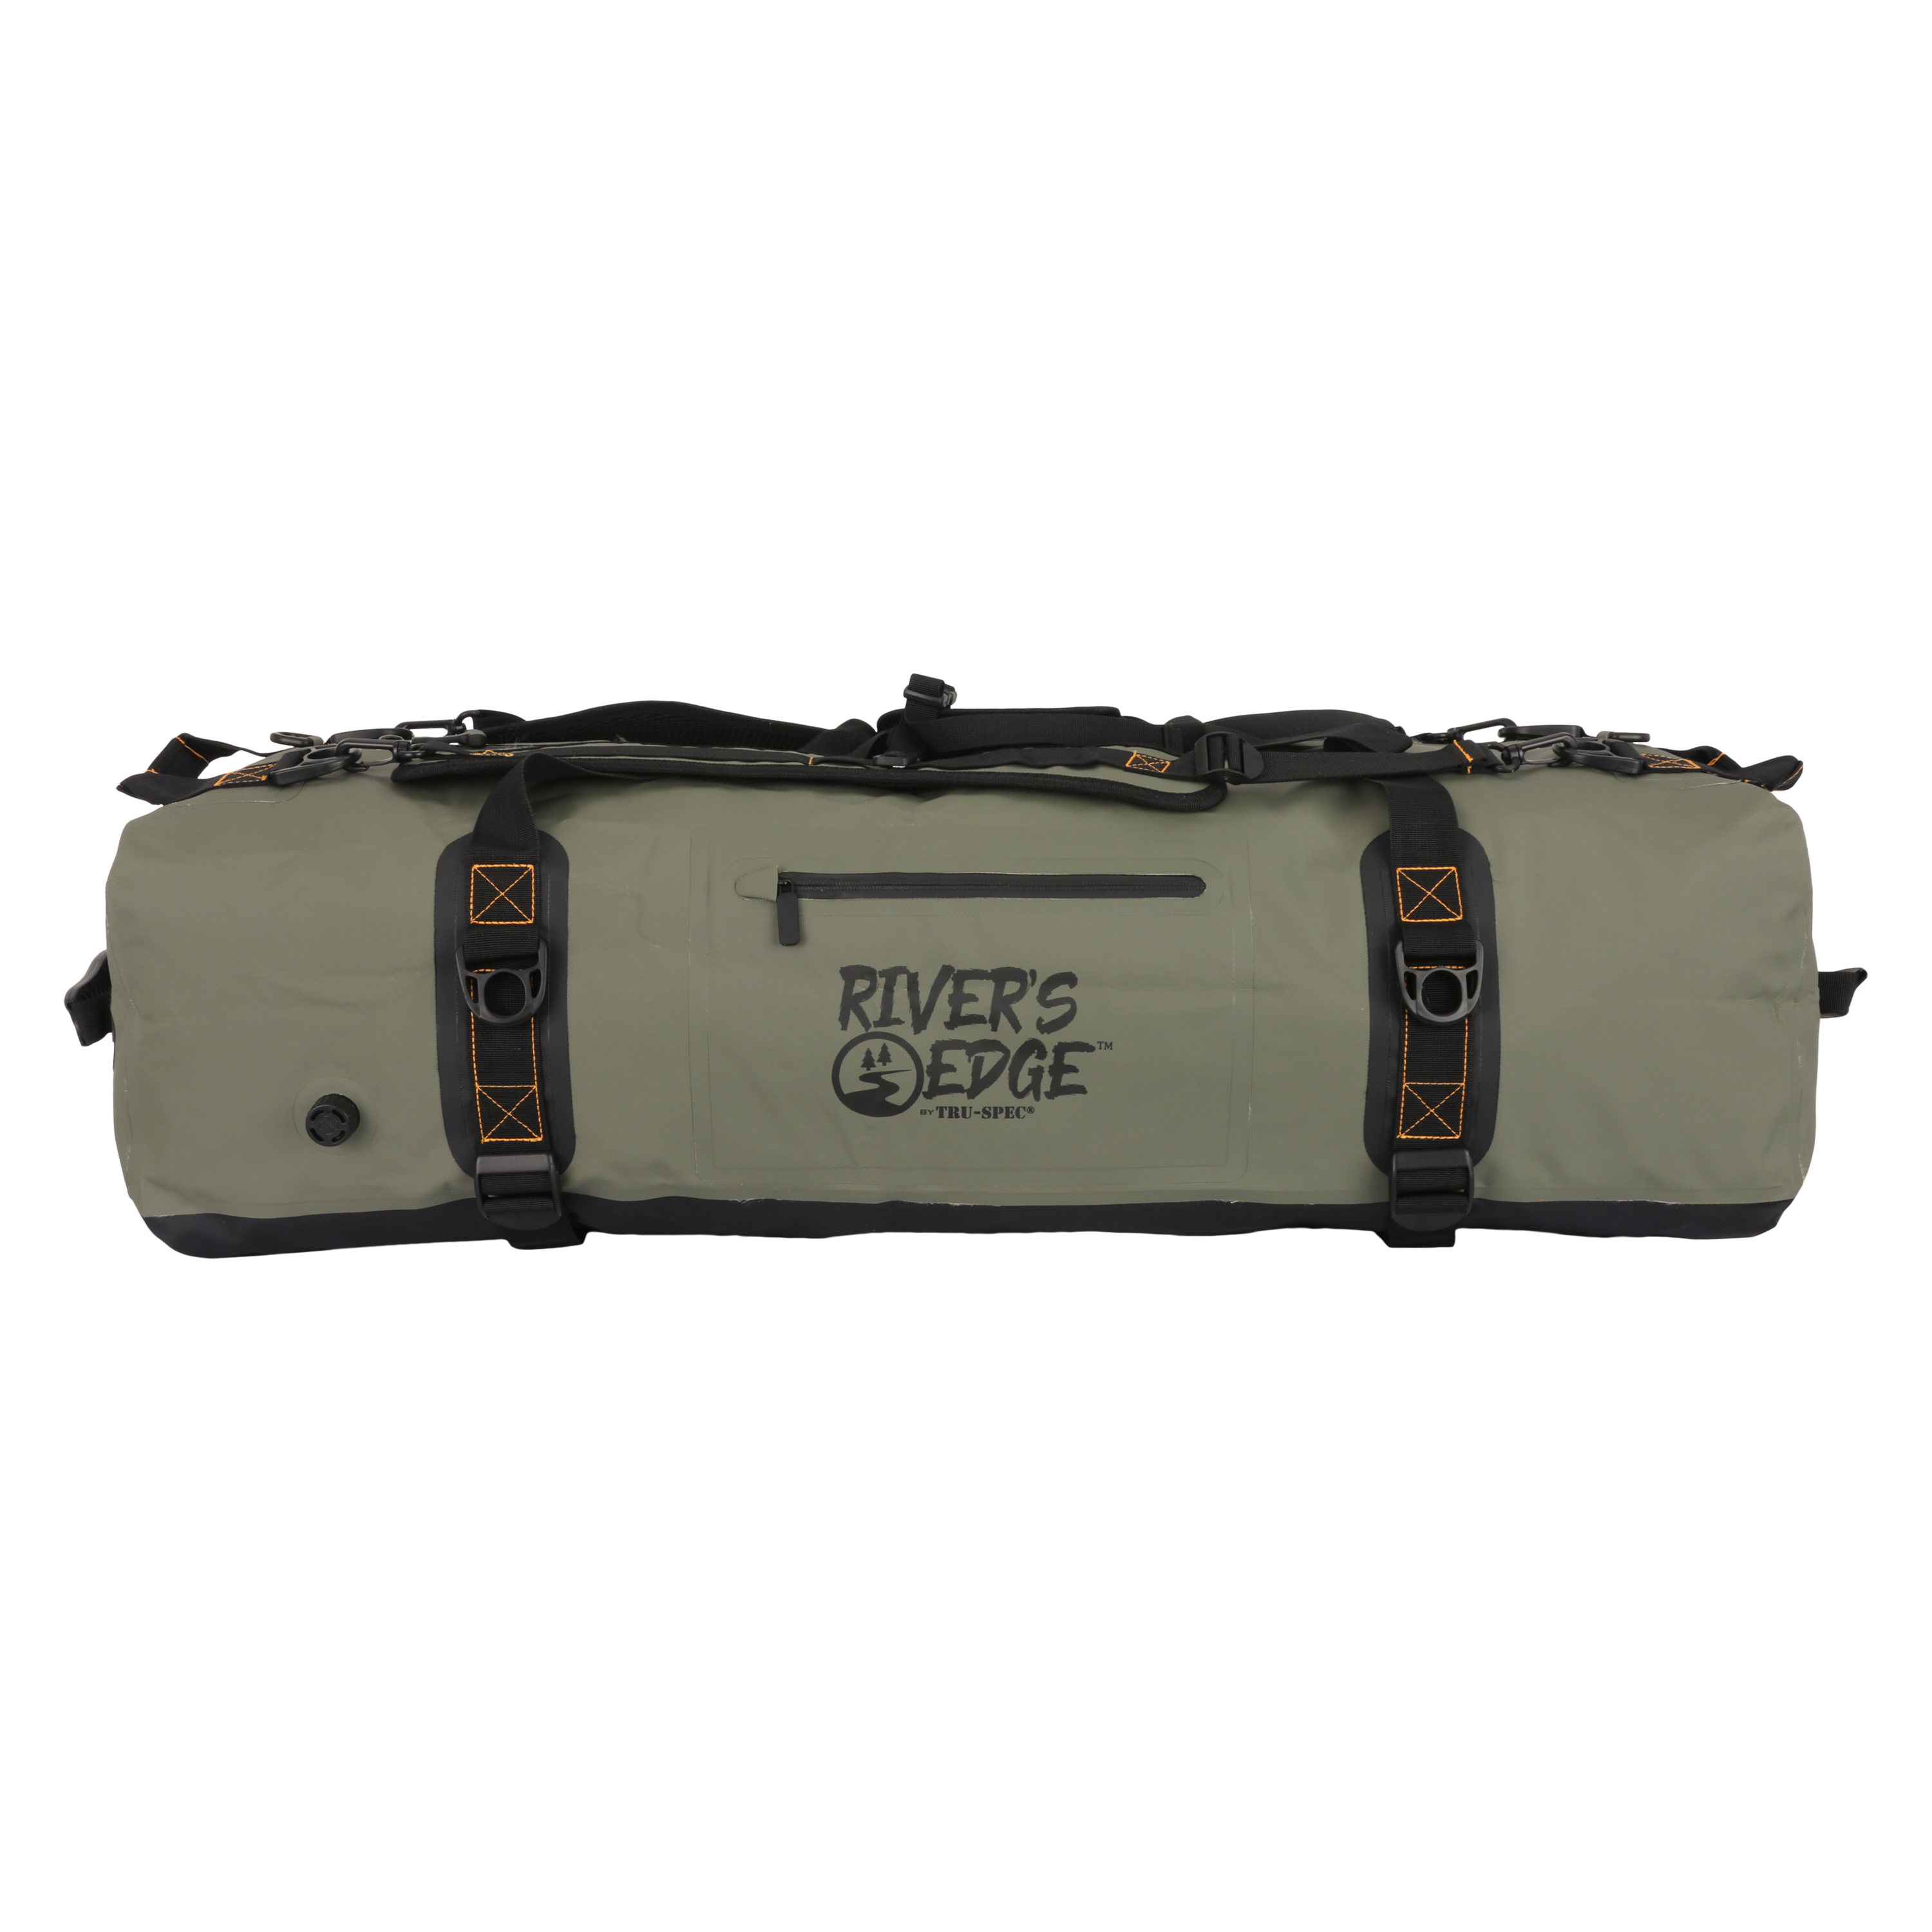 RIVER’S EDGE™ 90L WATERPROOF DRY XPEDITION DUFFLE BAG